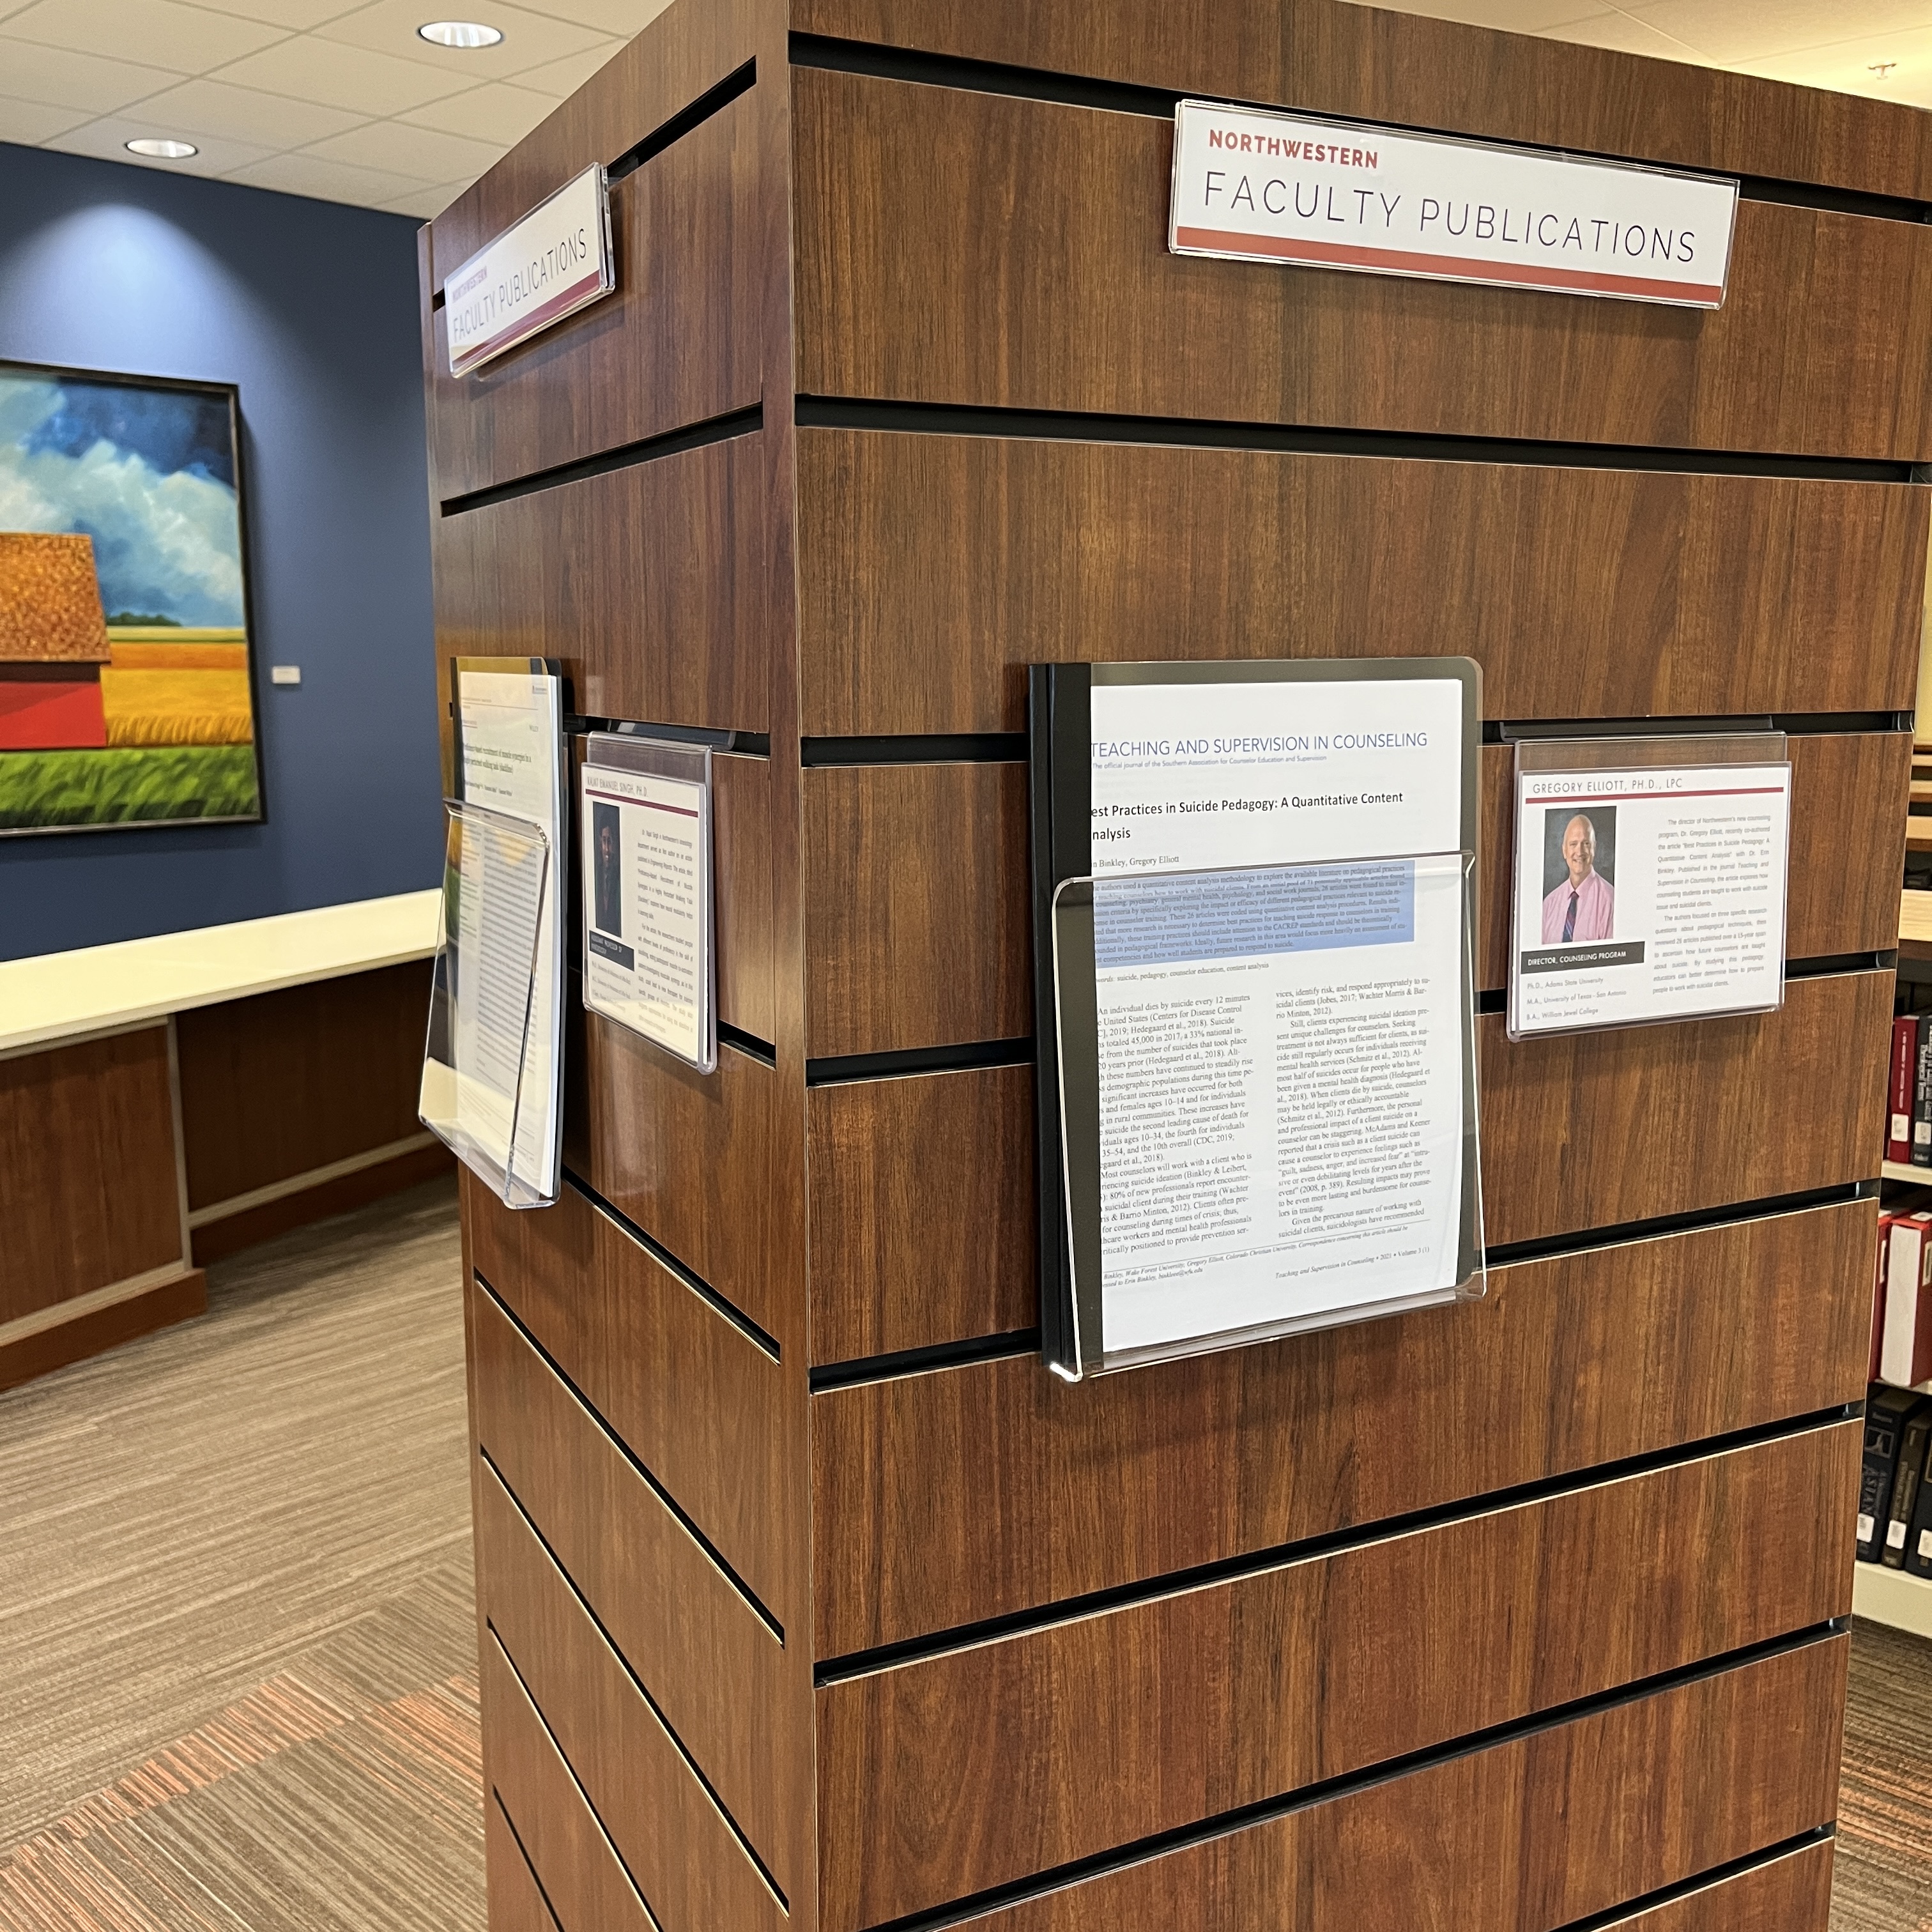 We've updated our Faculty Publications display with recent work by members of the NWC faculty.